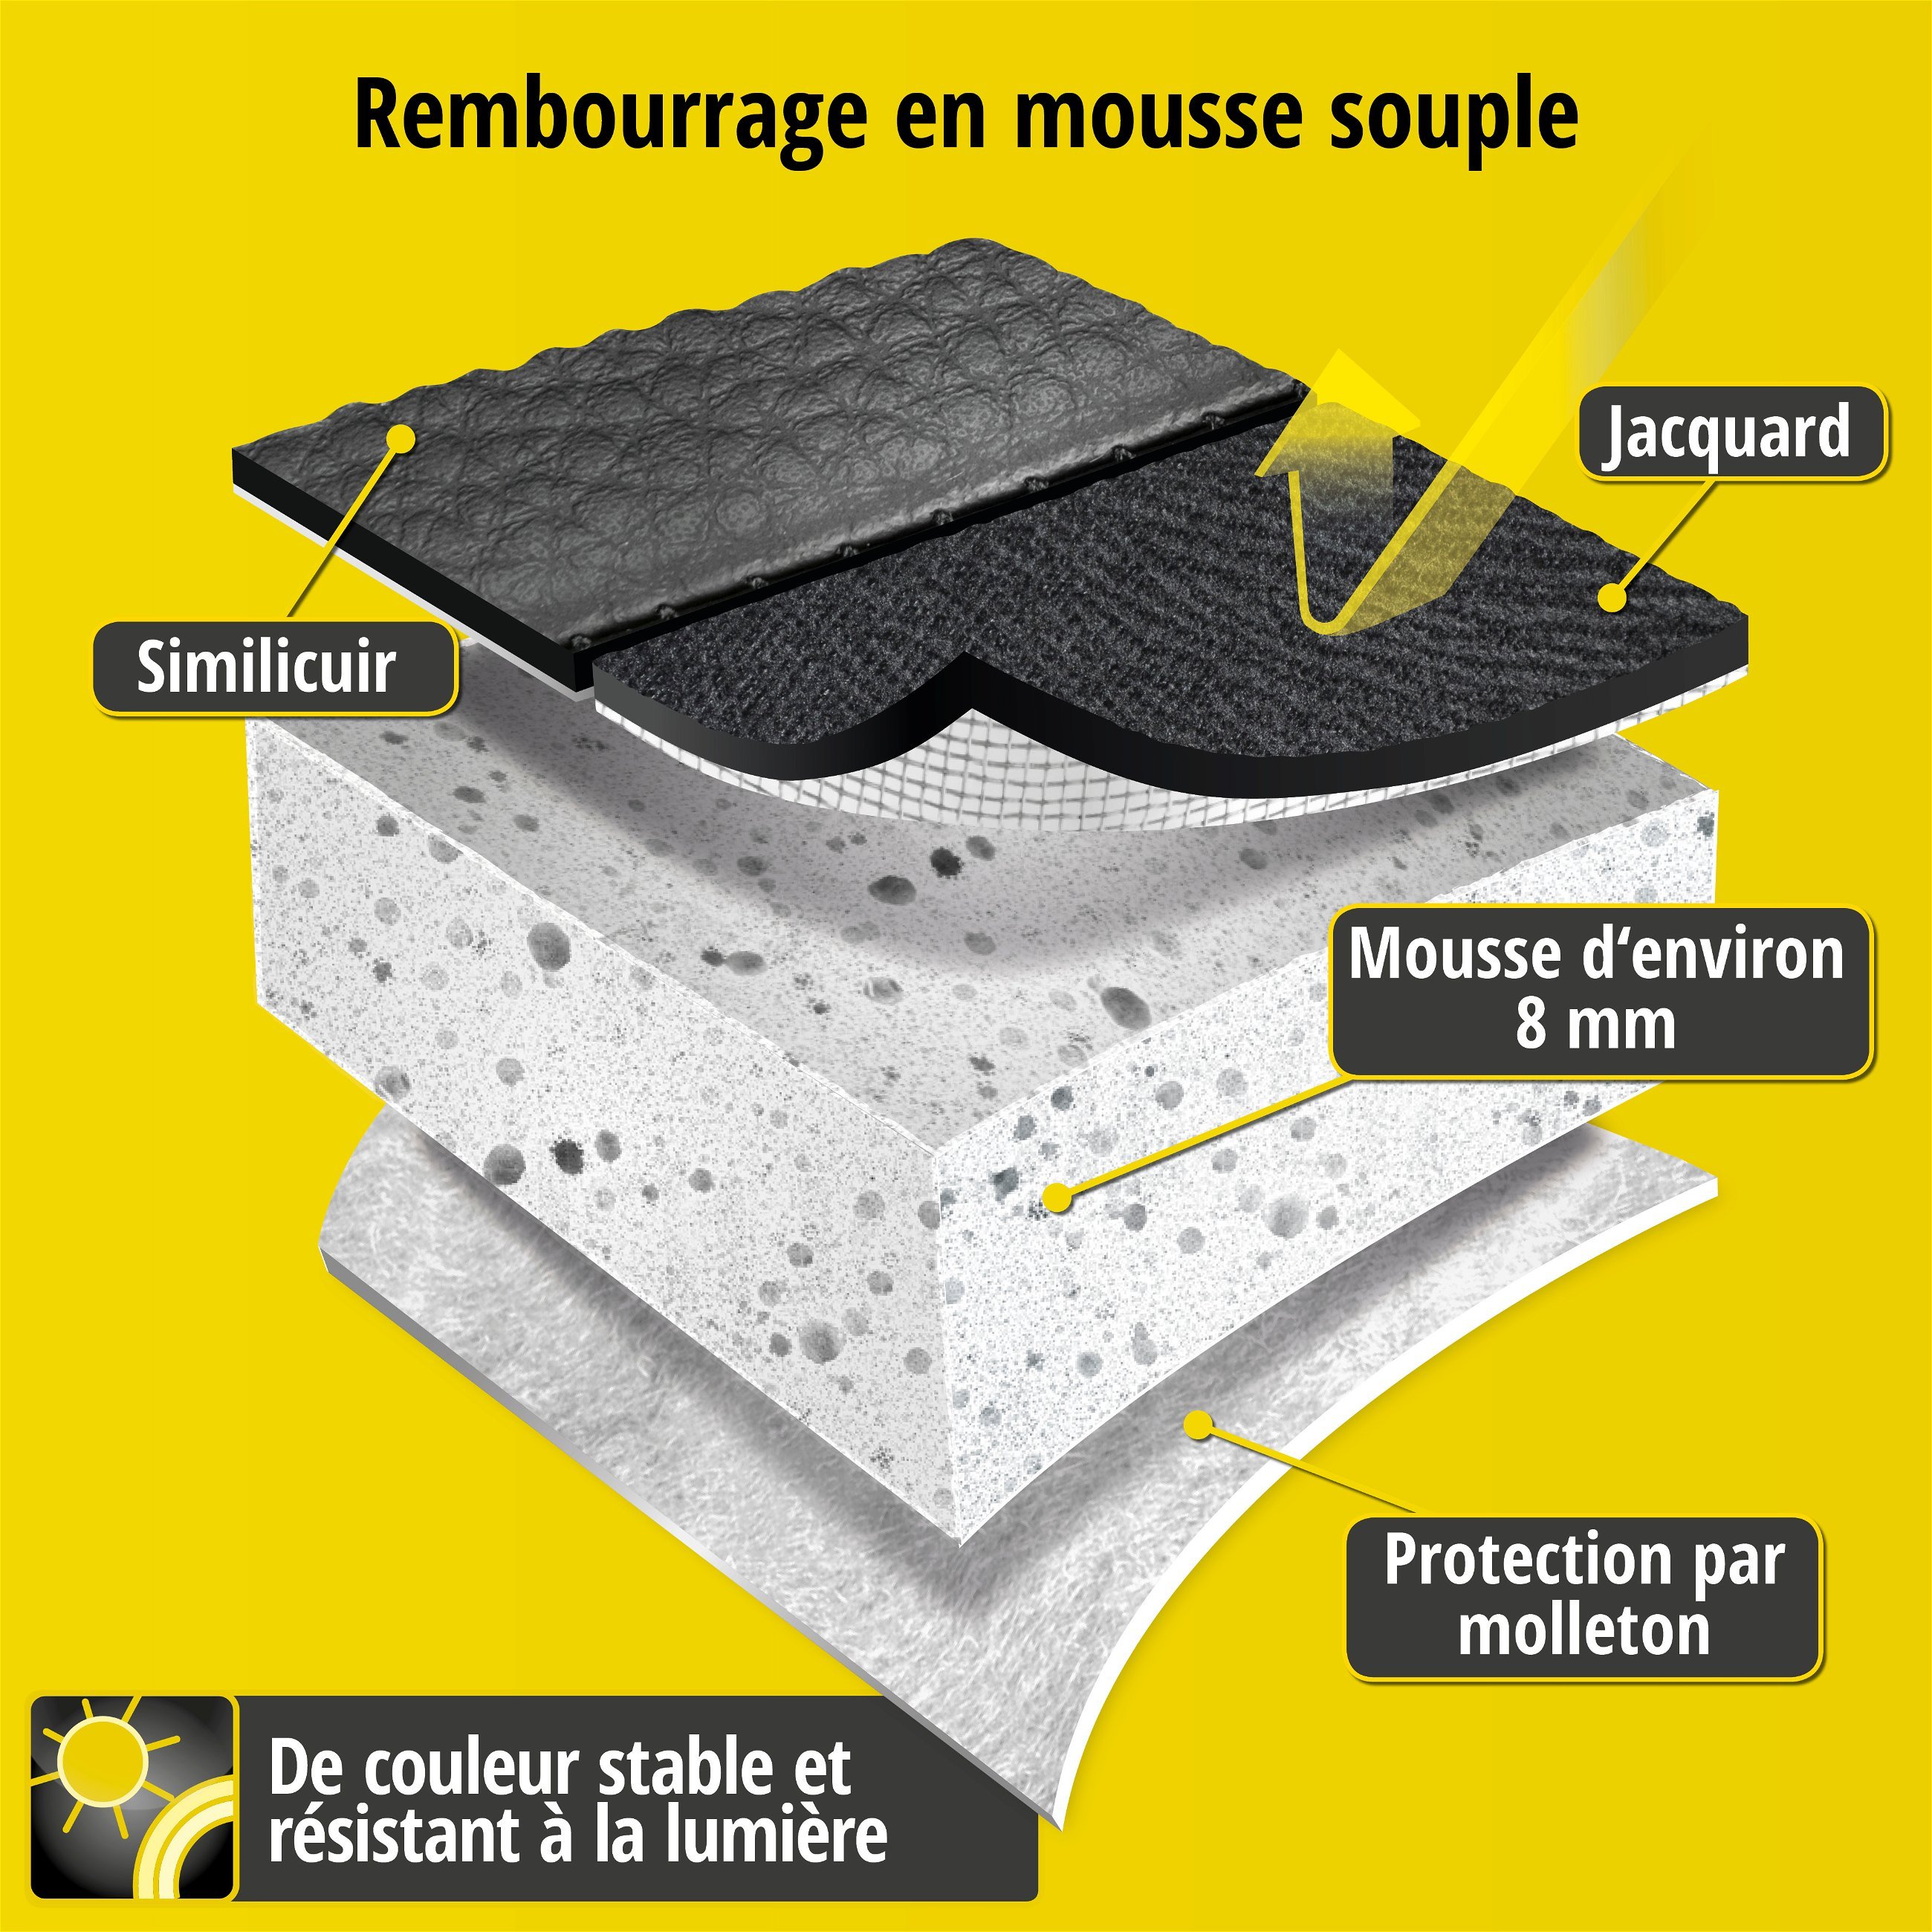 Housse de siège Bari pour Opel Astra H 01/2004-05/2014, Astra H notchback 02/2007-05/2014, 1 housse de siège arrière pour sièges normaux